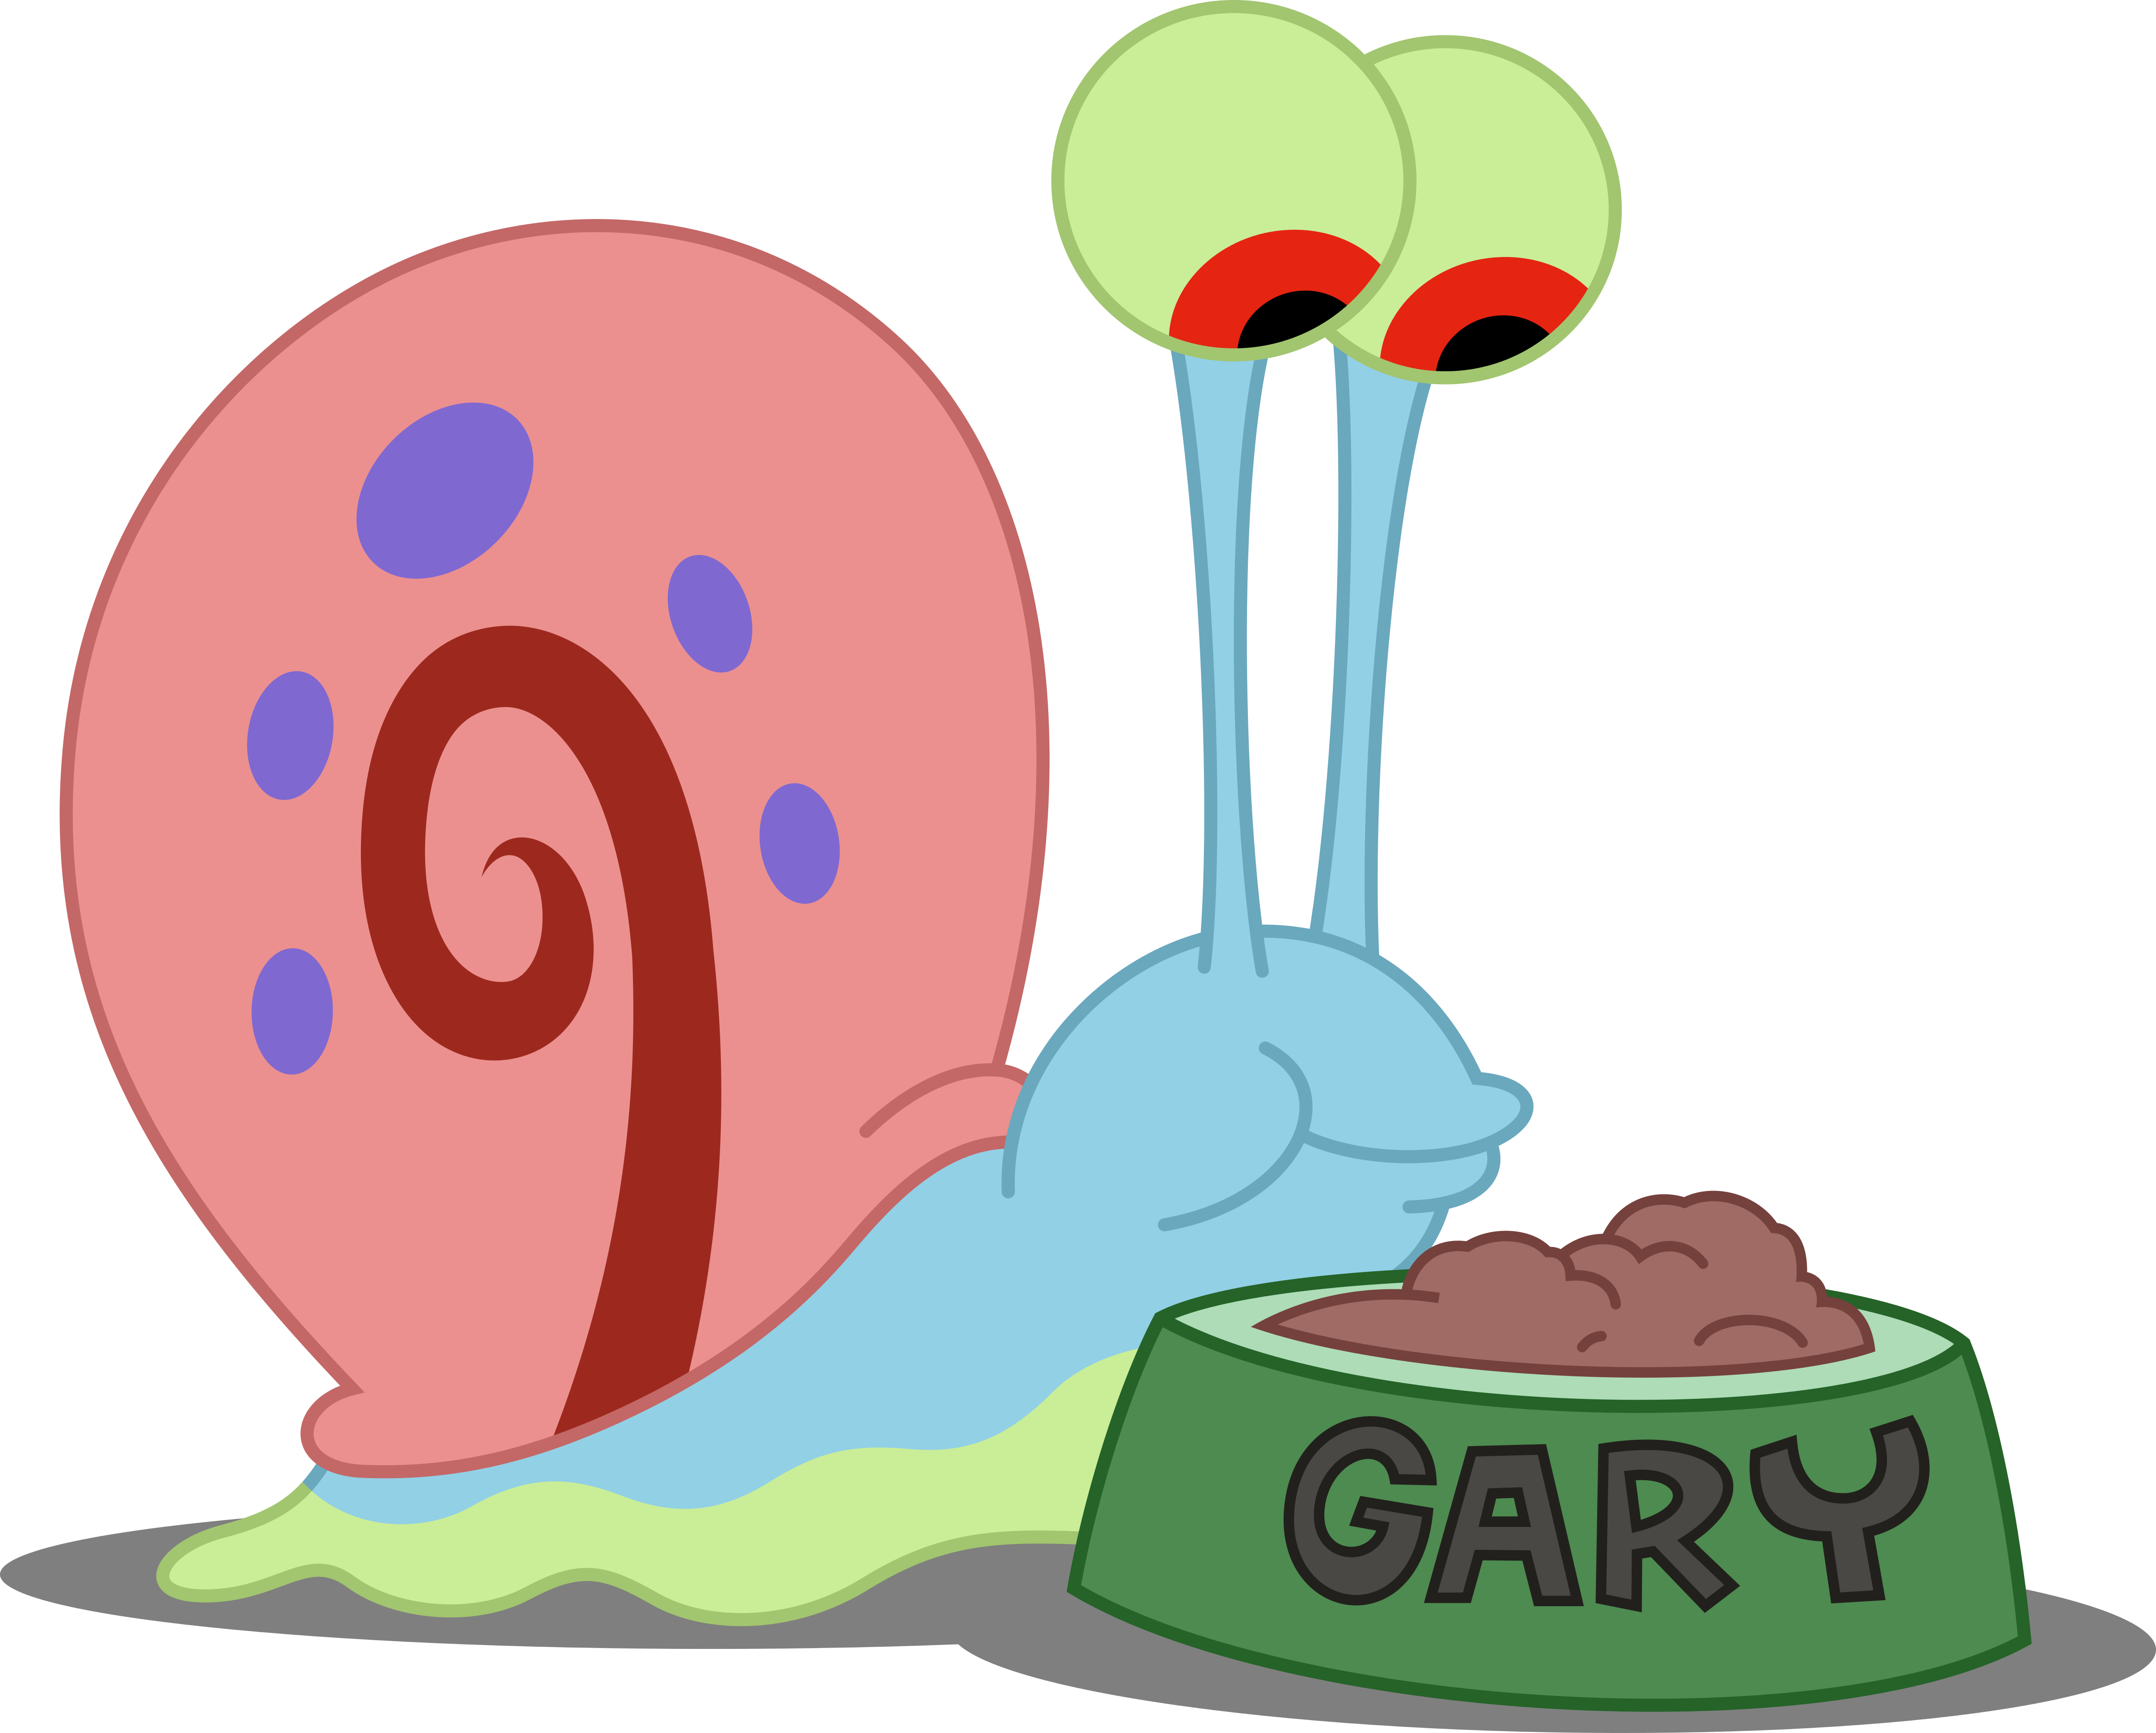 Gary The Snail wallpapers.